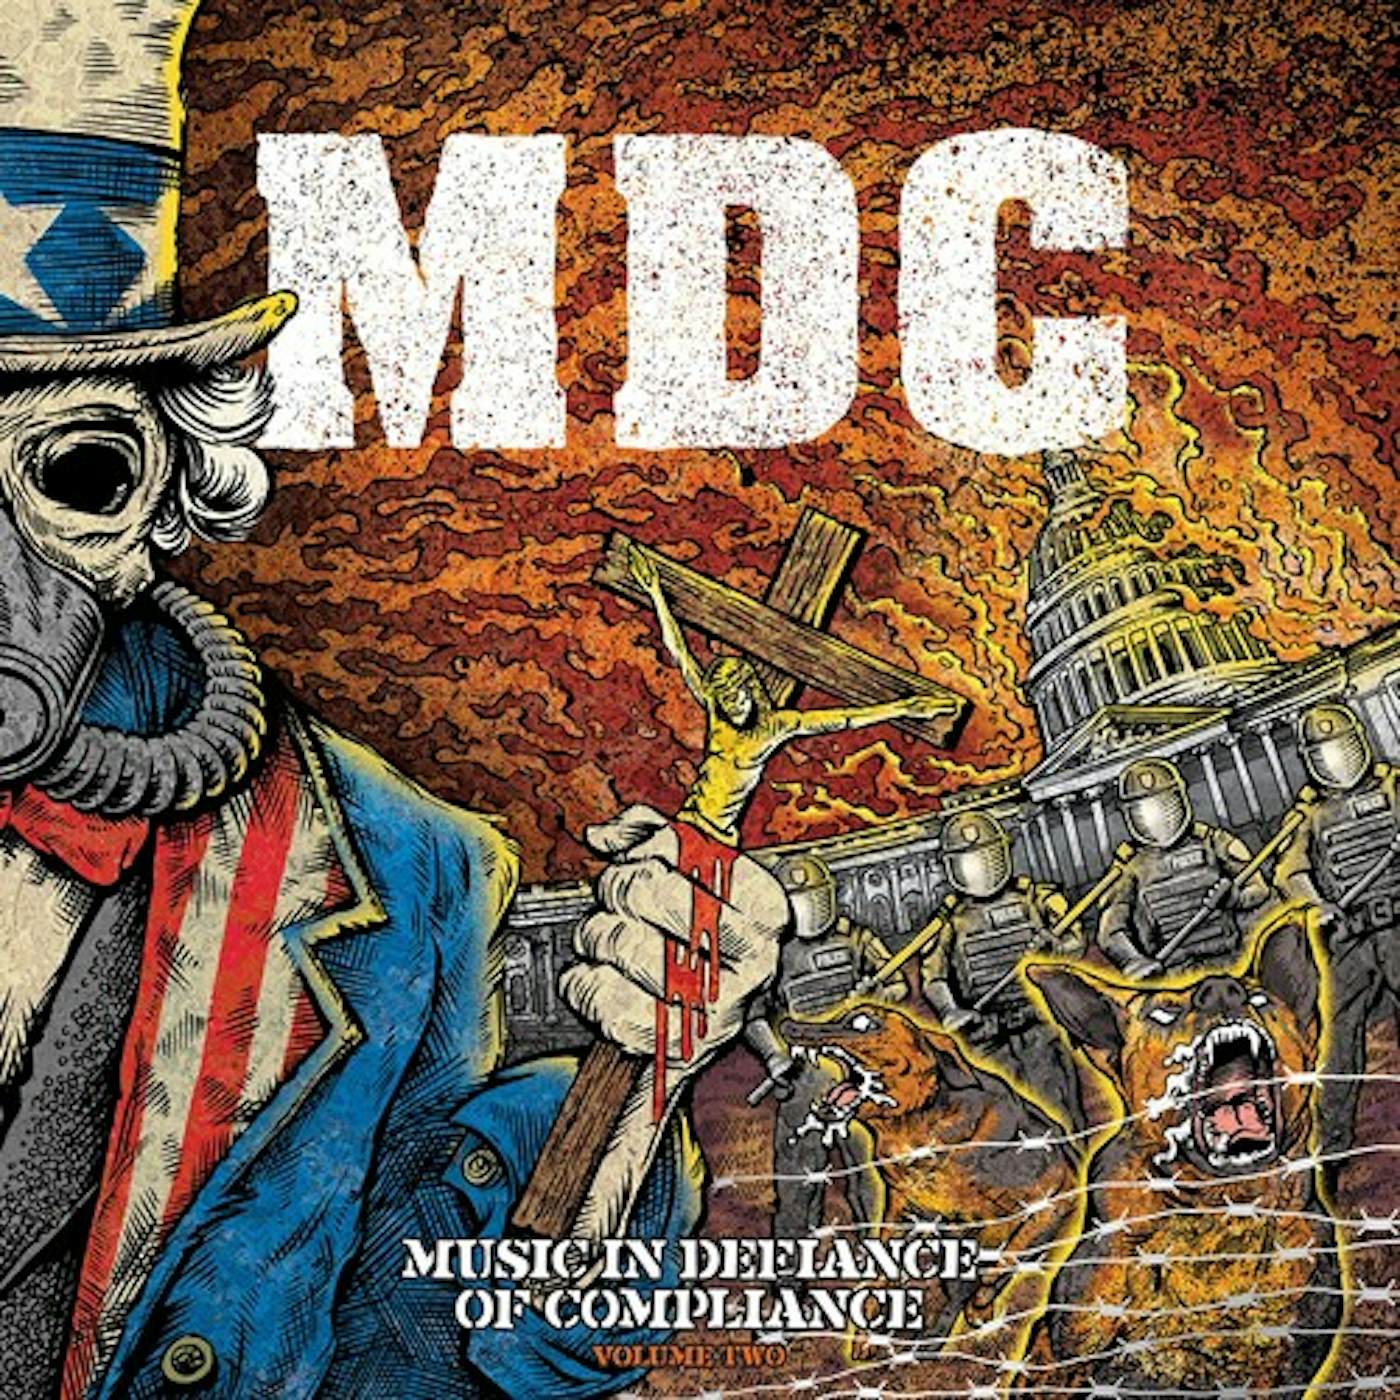 MDC MUSIC IN DEFIANCE OF COMPLIANCE - VOLUME TWO Vinyl Record